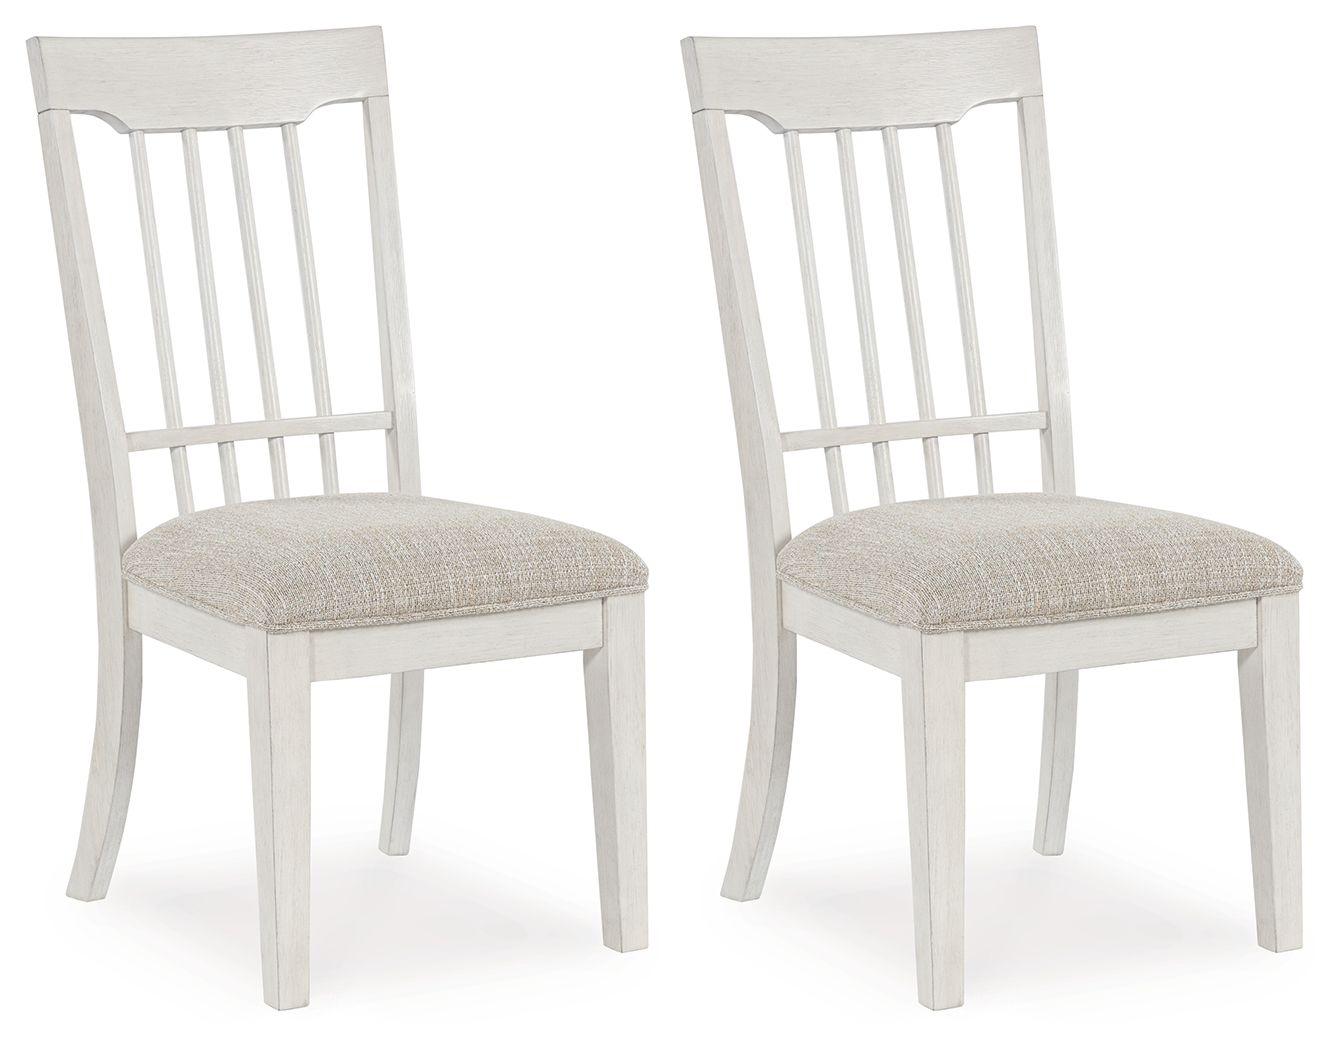 Benchcraft® - Shaybrock - Antique White / Brown - Dining Upholstered Side Chair (Set of 2) - 5th Avenue Furniture